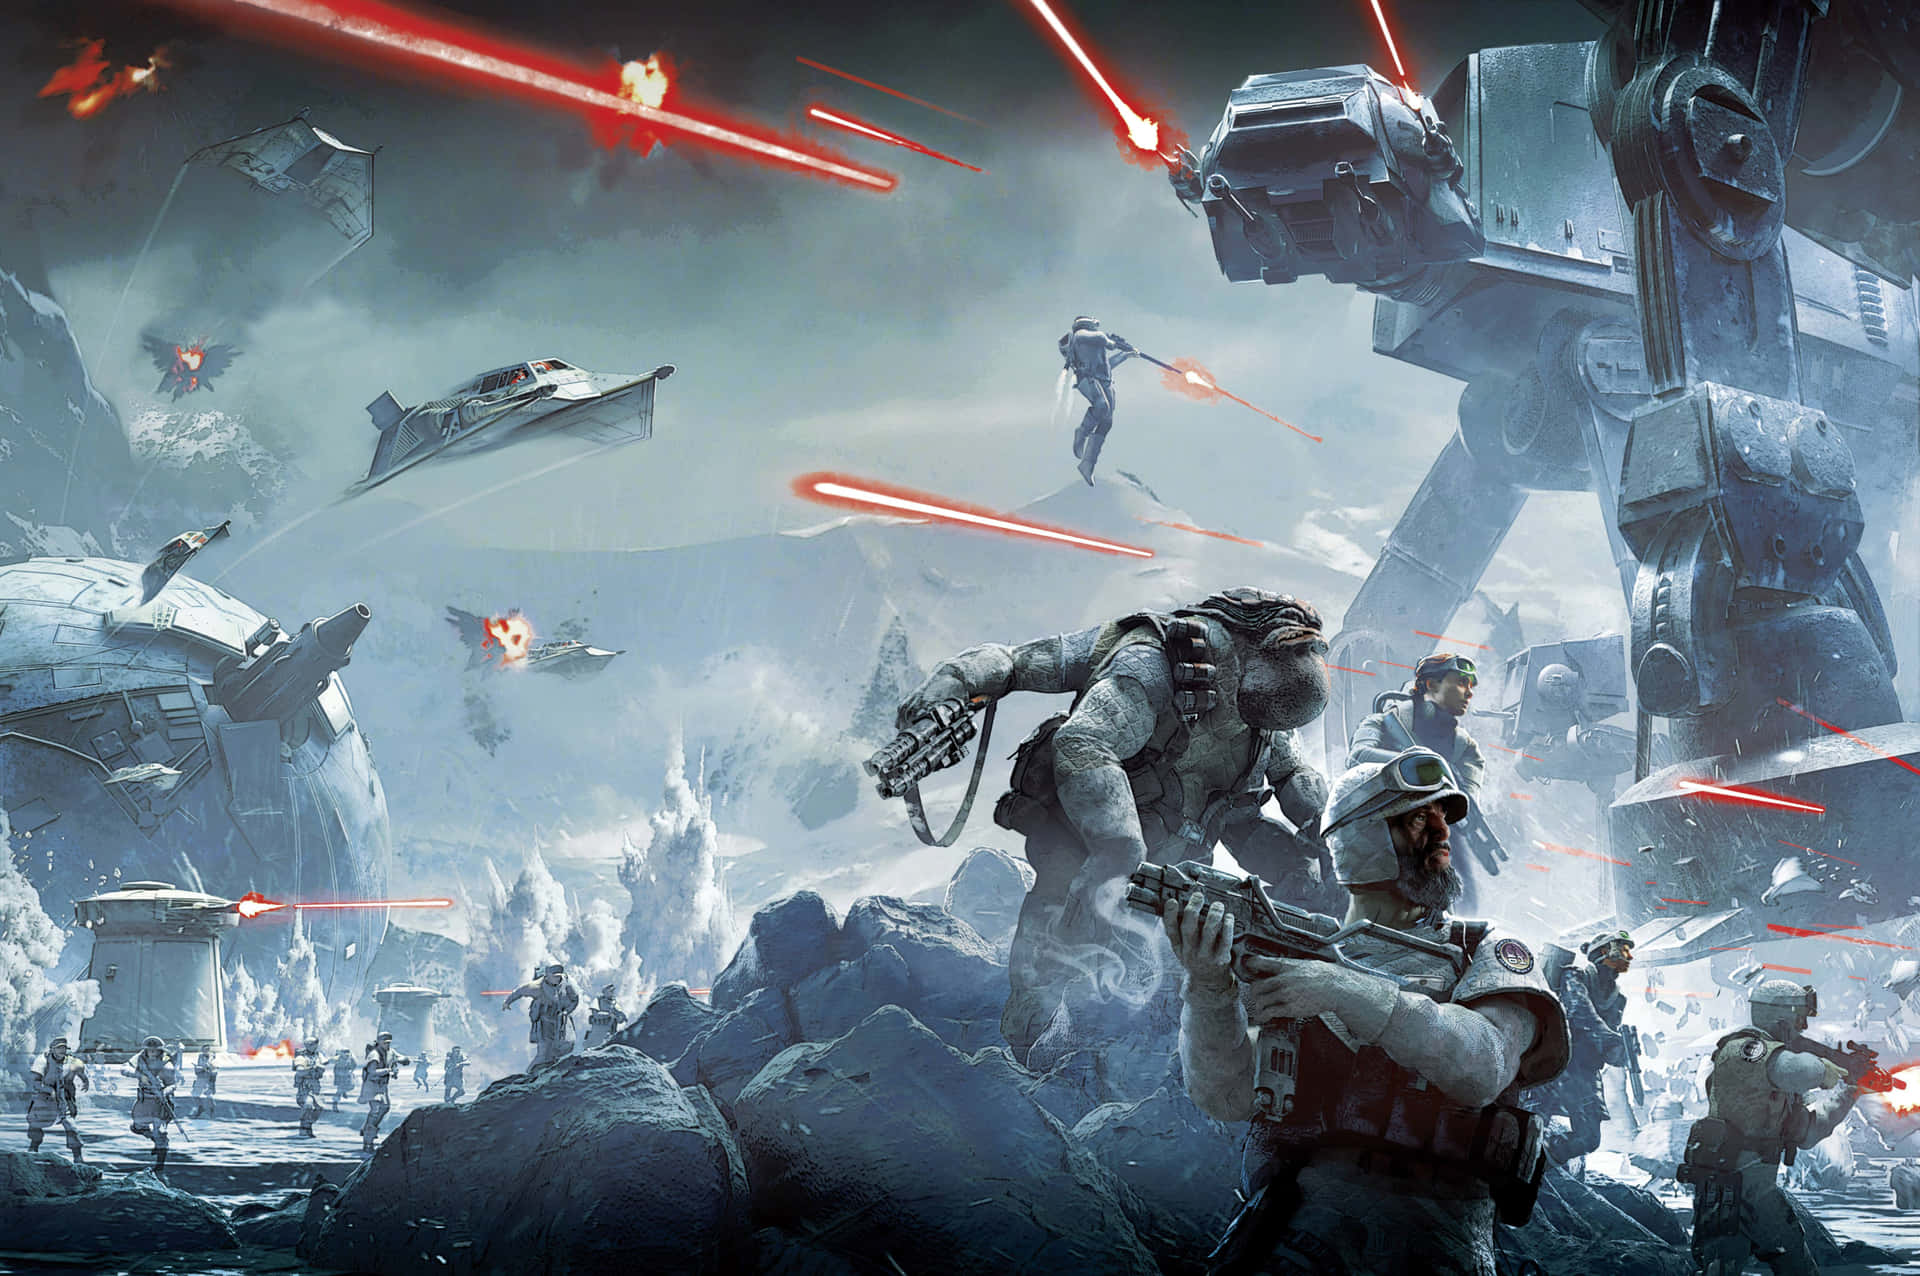 Captivating Battle Scene from a Star Wars Game Wallpaper